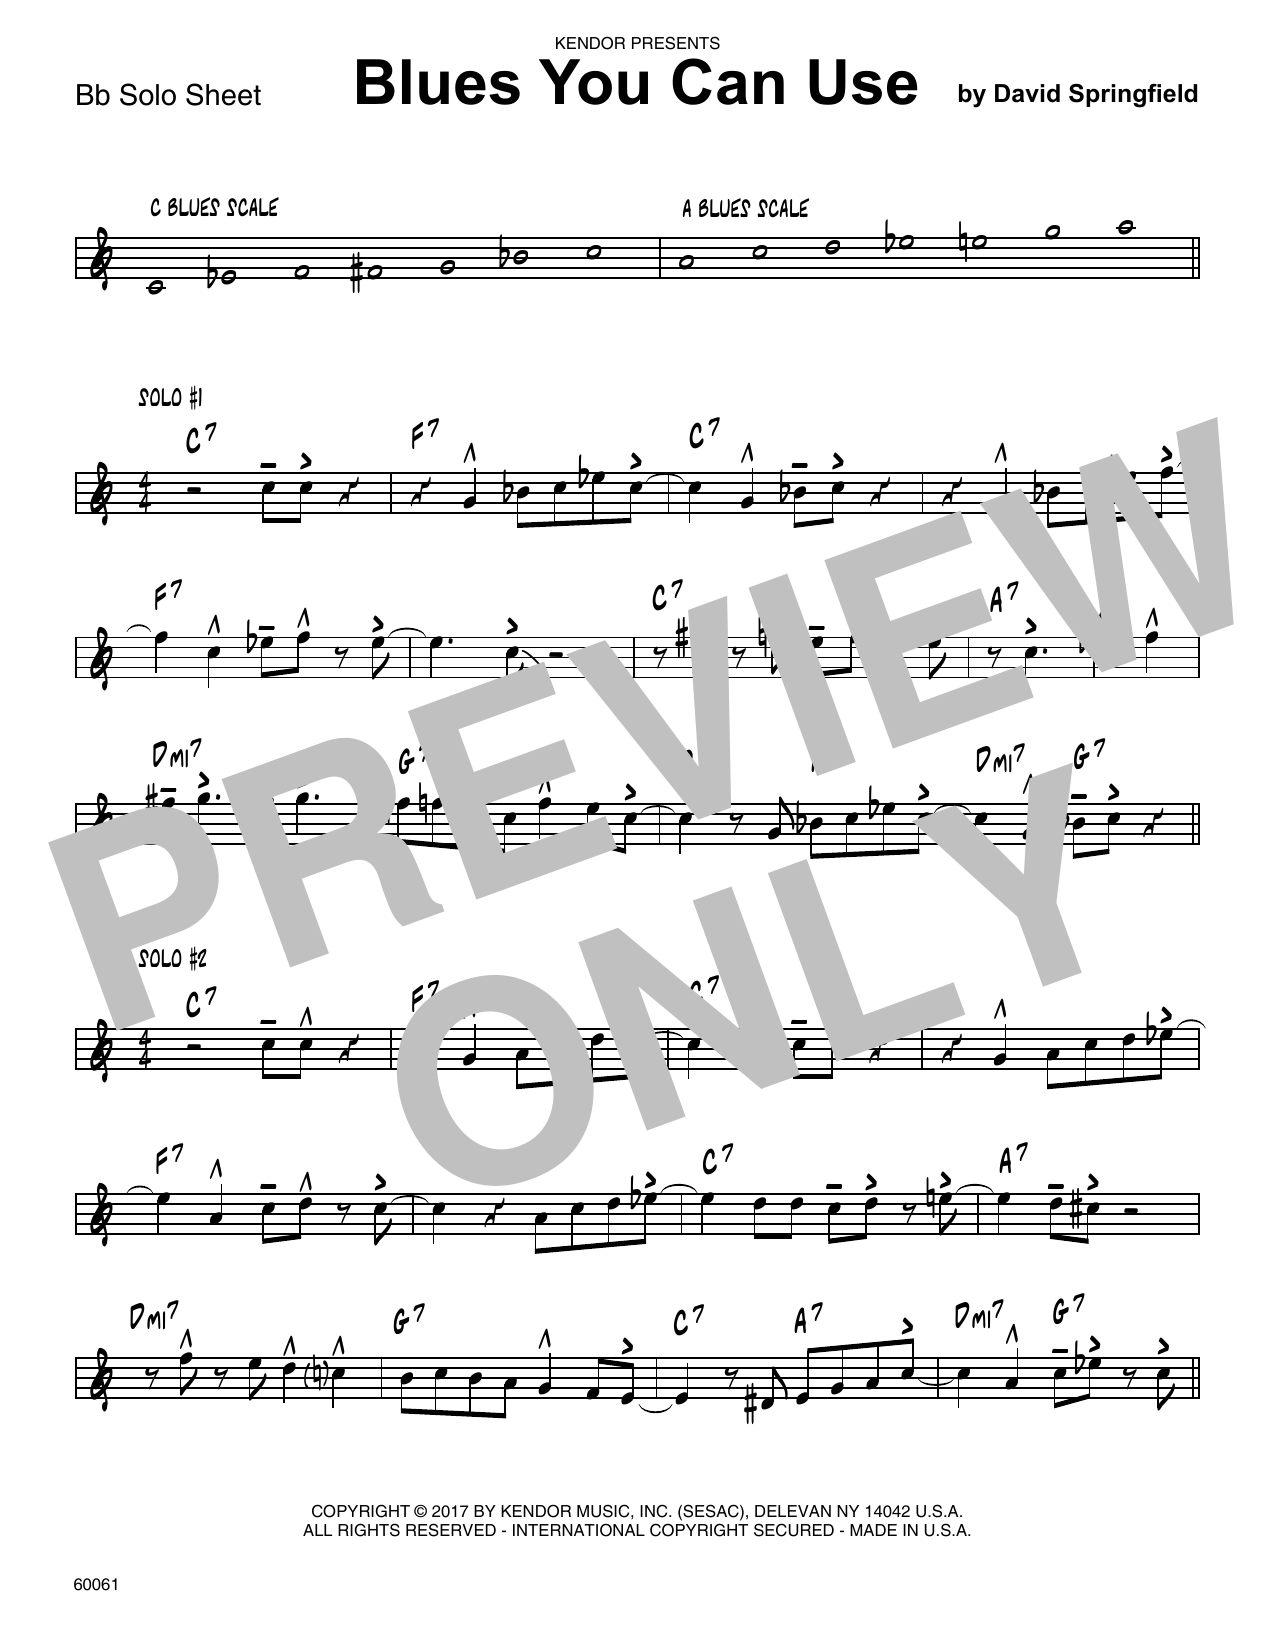 Download David Springfield Blues You Can Use - Solo Sheet - Tenor Sax sheet music and printable PDF score & Jazz music notes